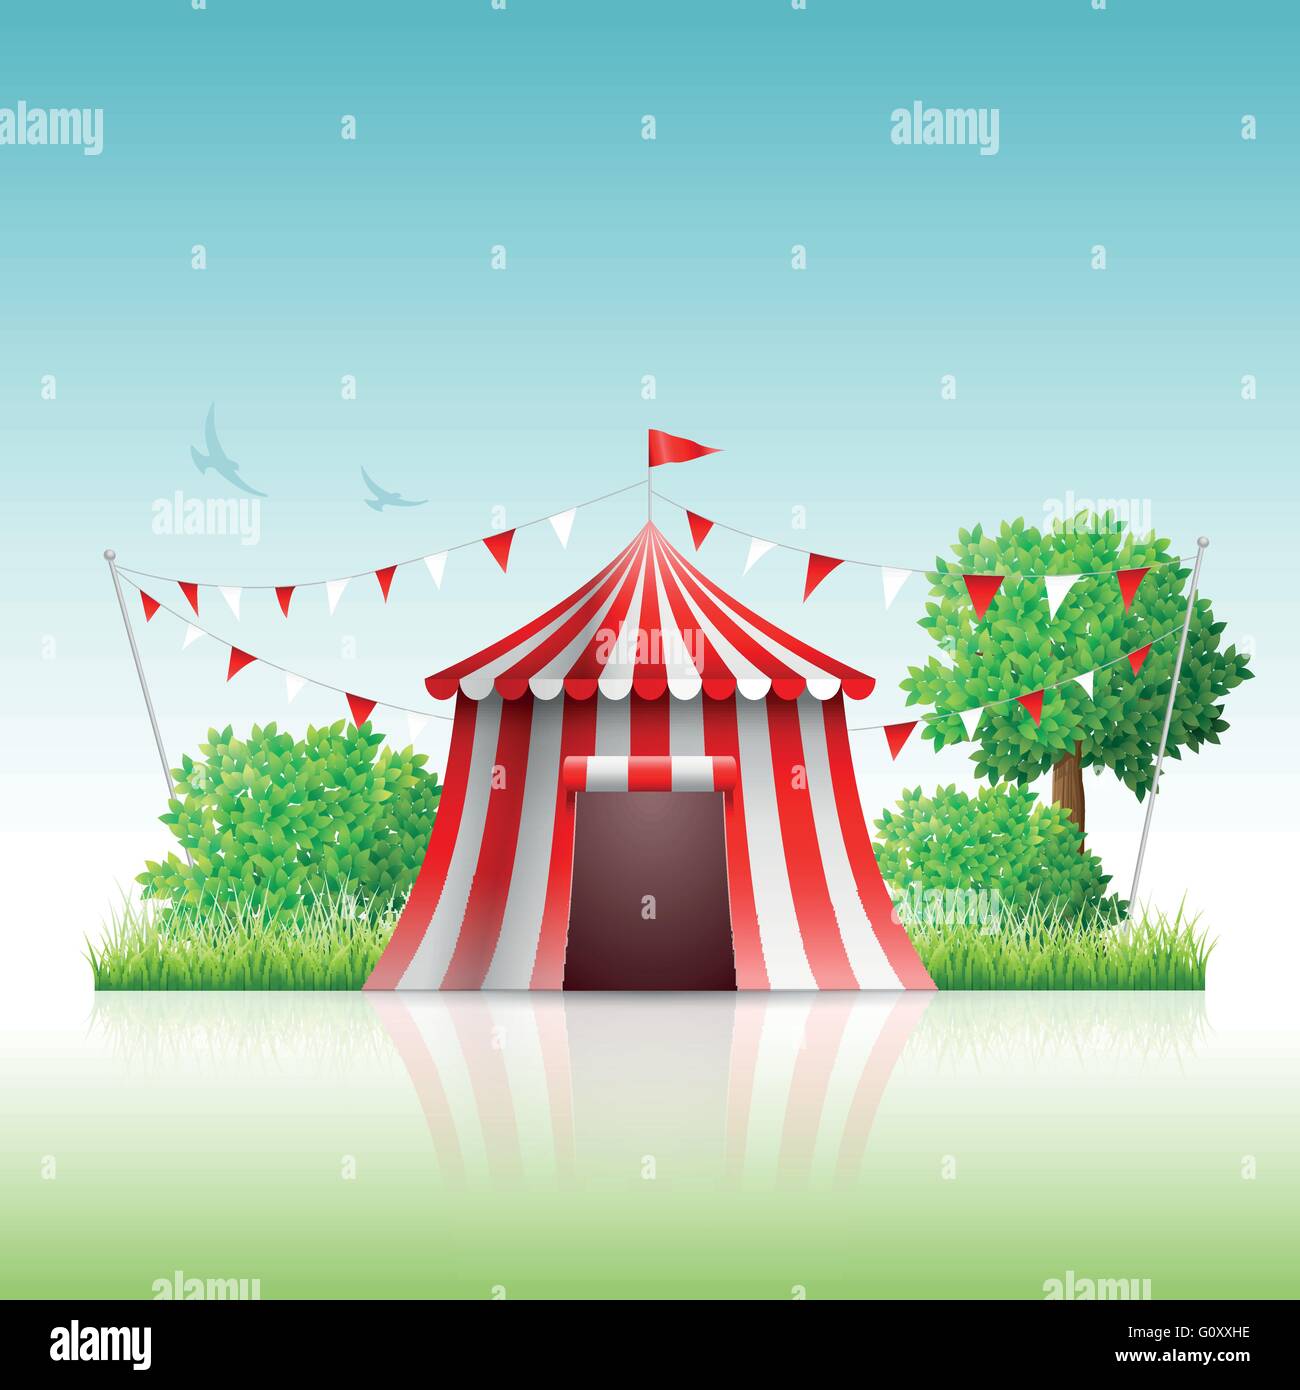 Vector illustration of circus in nature. Stock Vector